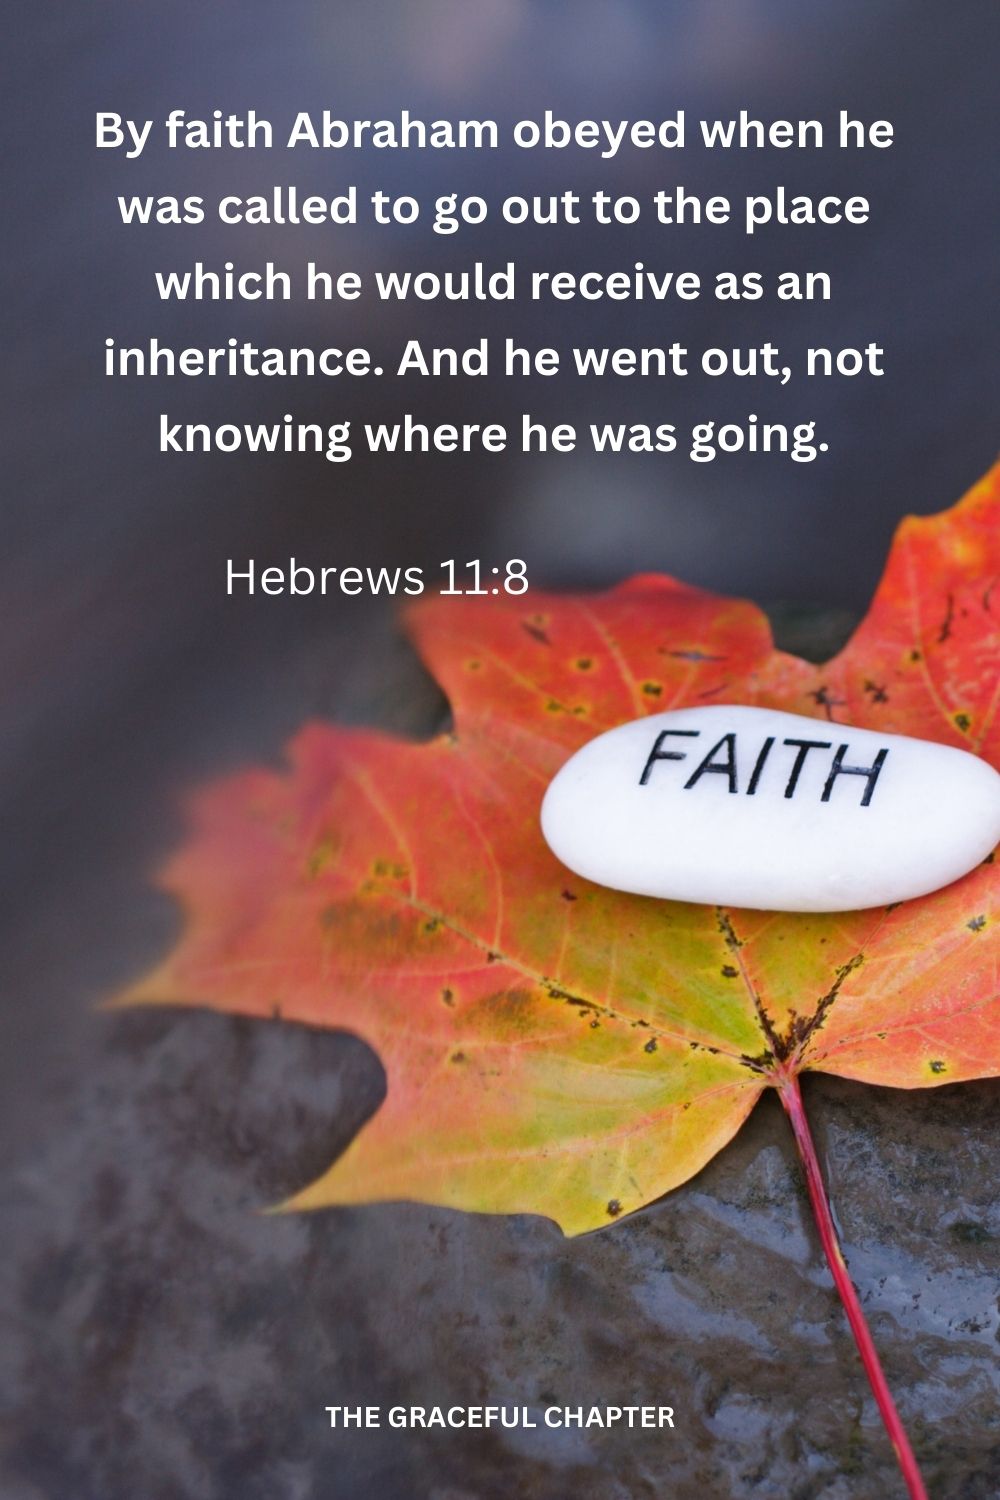 By faith Abraham obeyed when he was called to go out to the place which he would receive as an inheritance. And he went out, not knowing where he was going. Hebrews 11:8